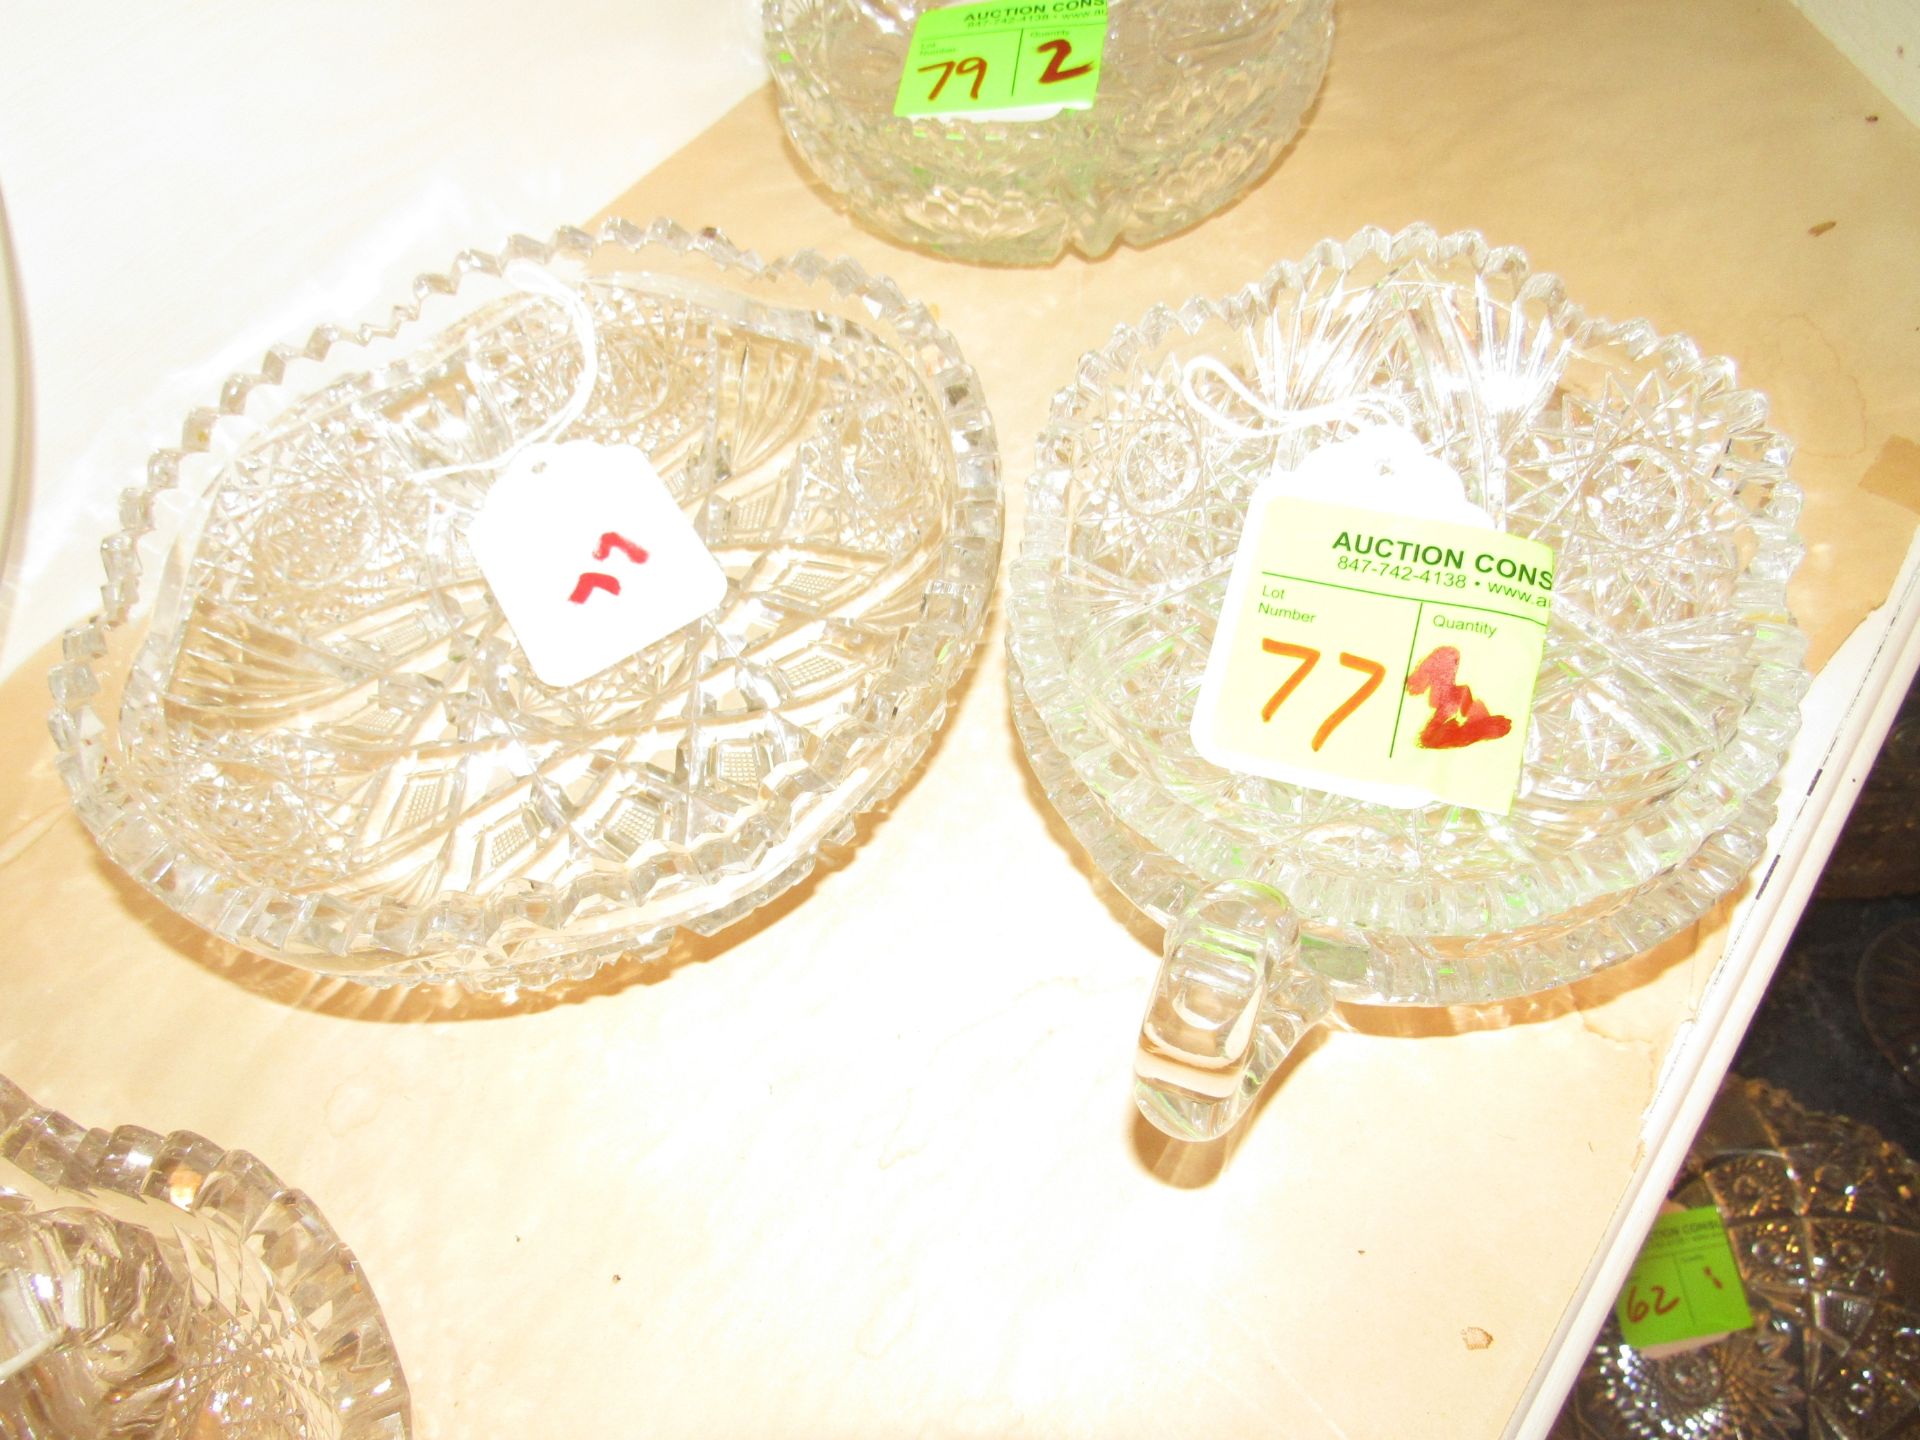 Three cut glass bowls, one with handle